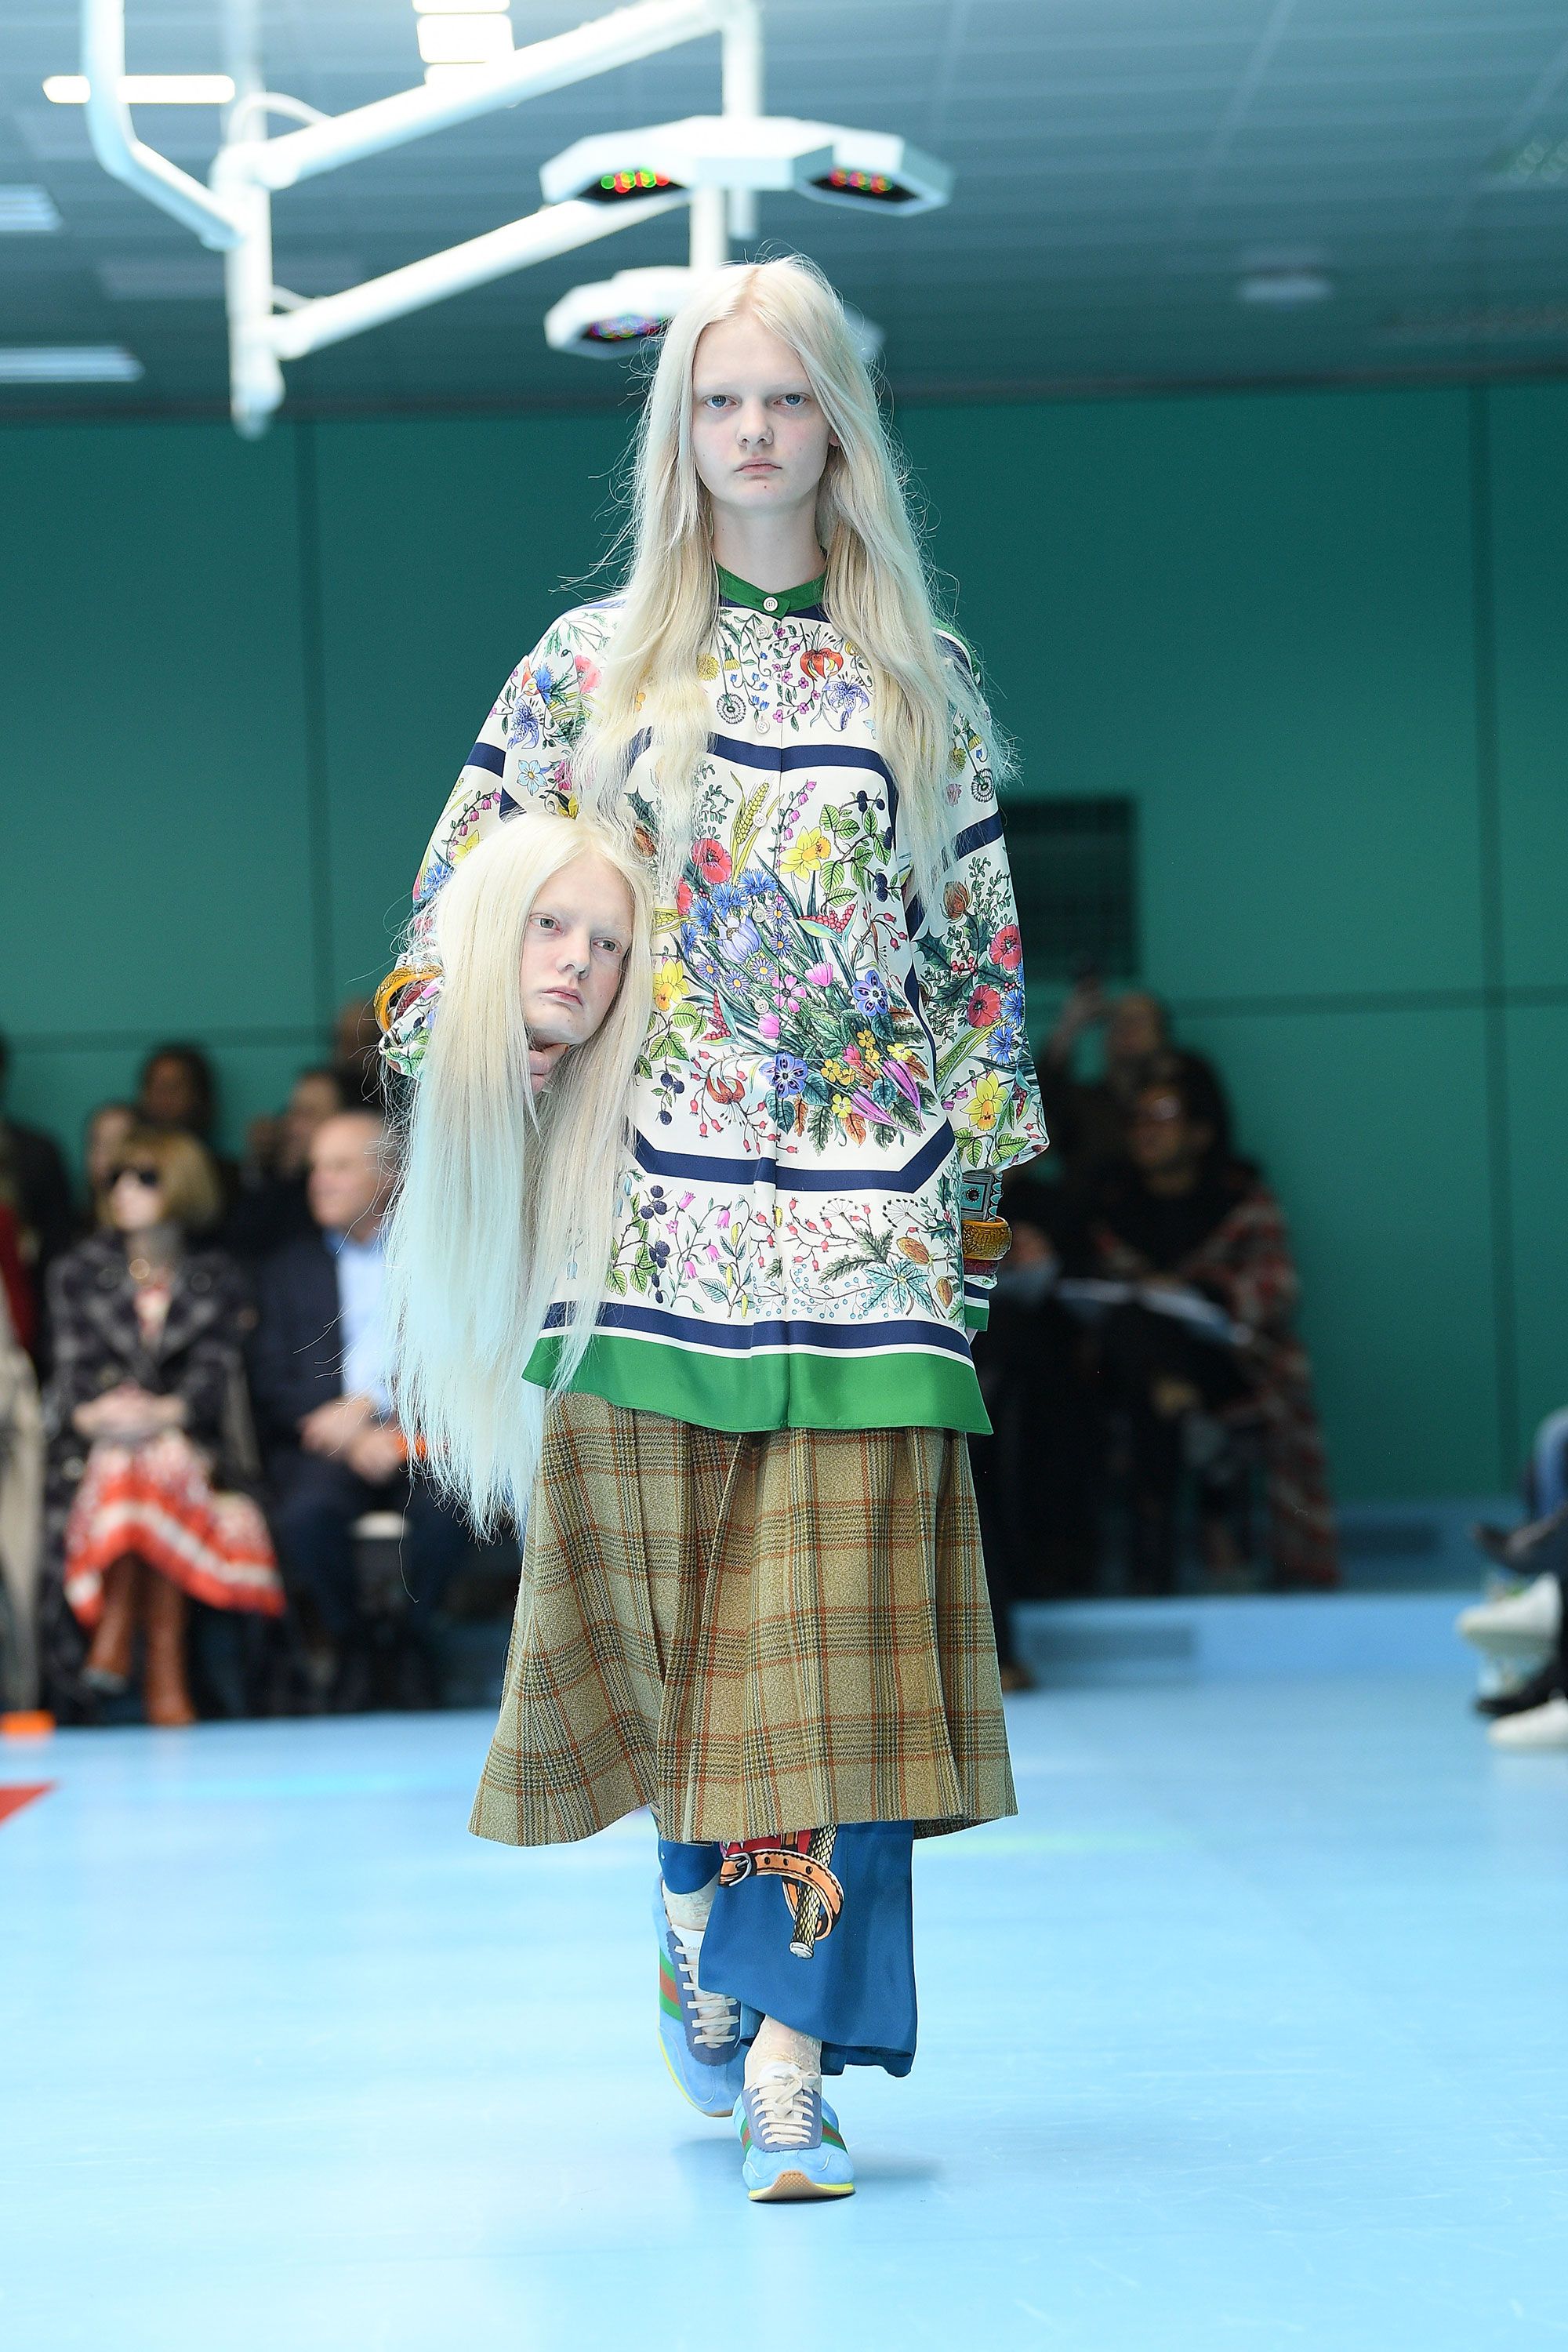 Gucci Show Features Models Carrying Severed Heads